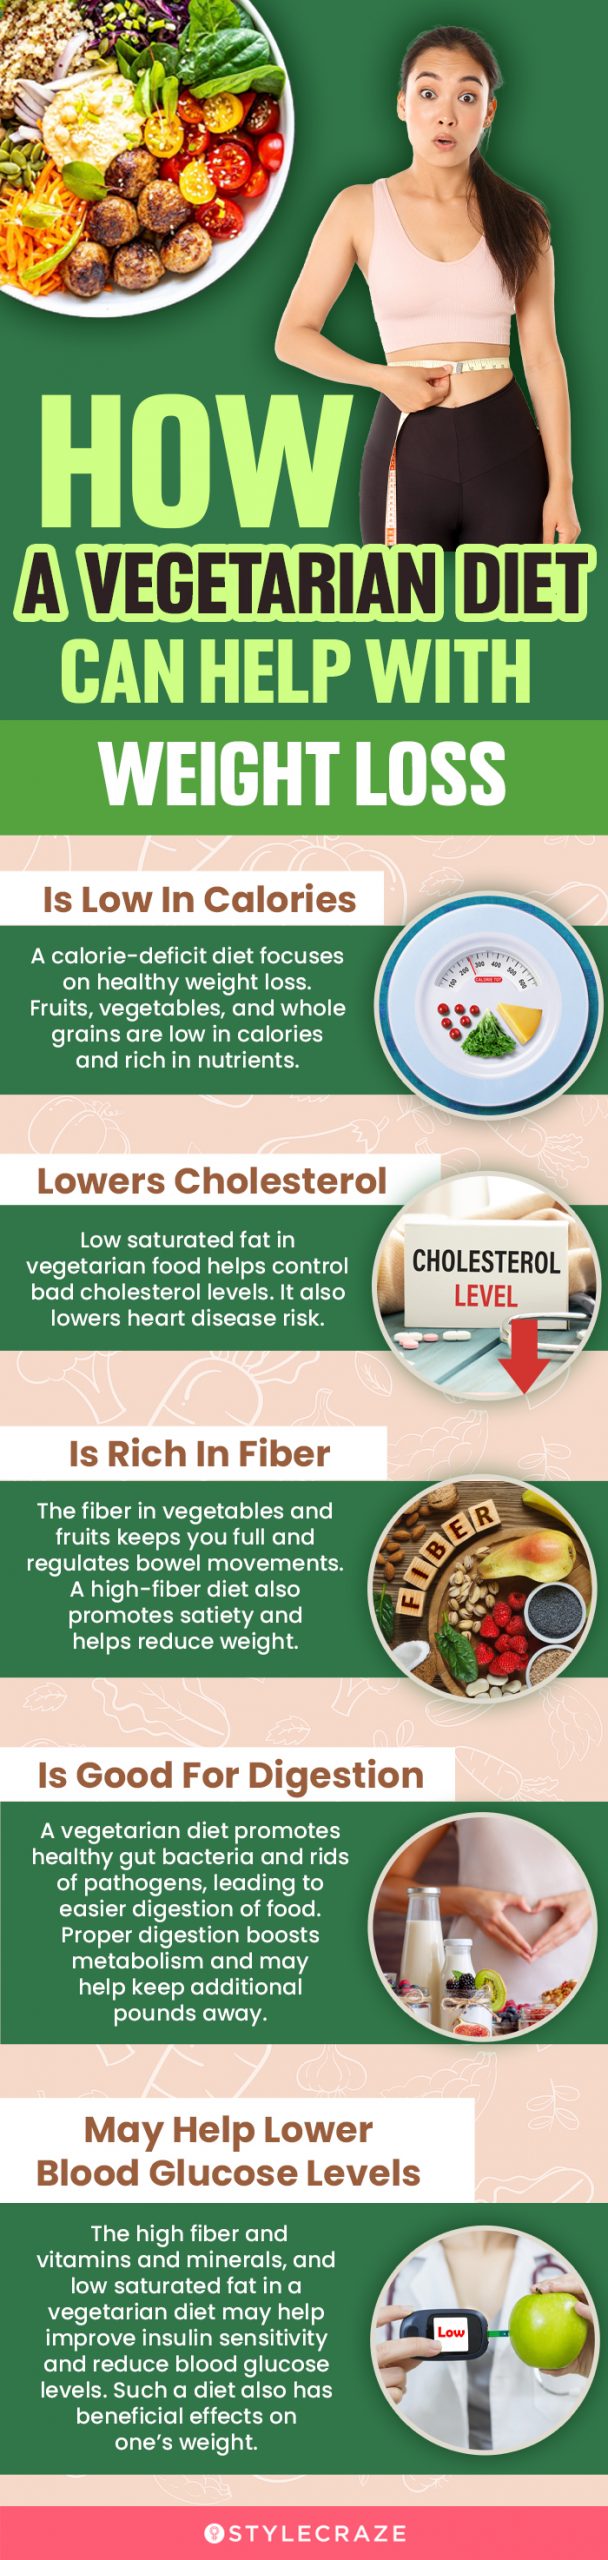 how a vegetarian diet can help with weight loss (infographic)